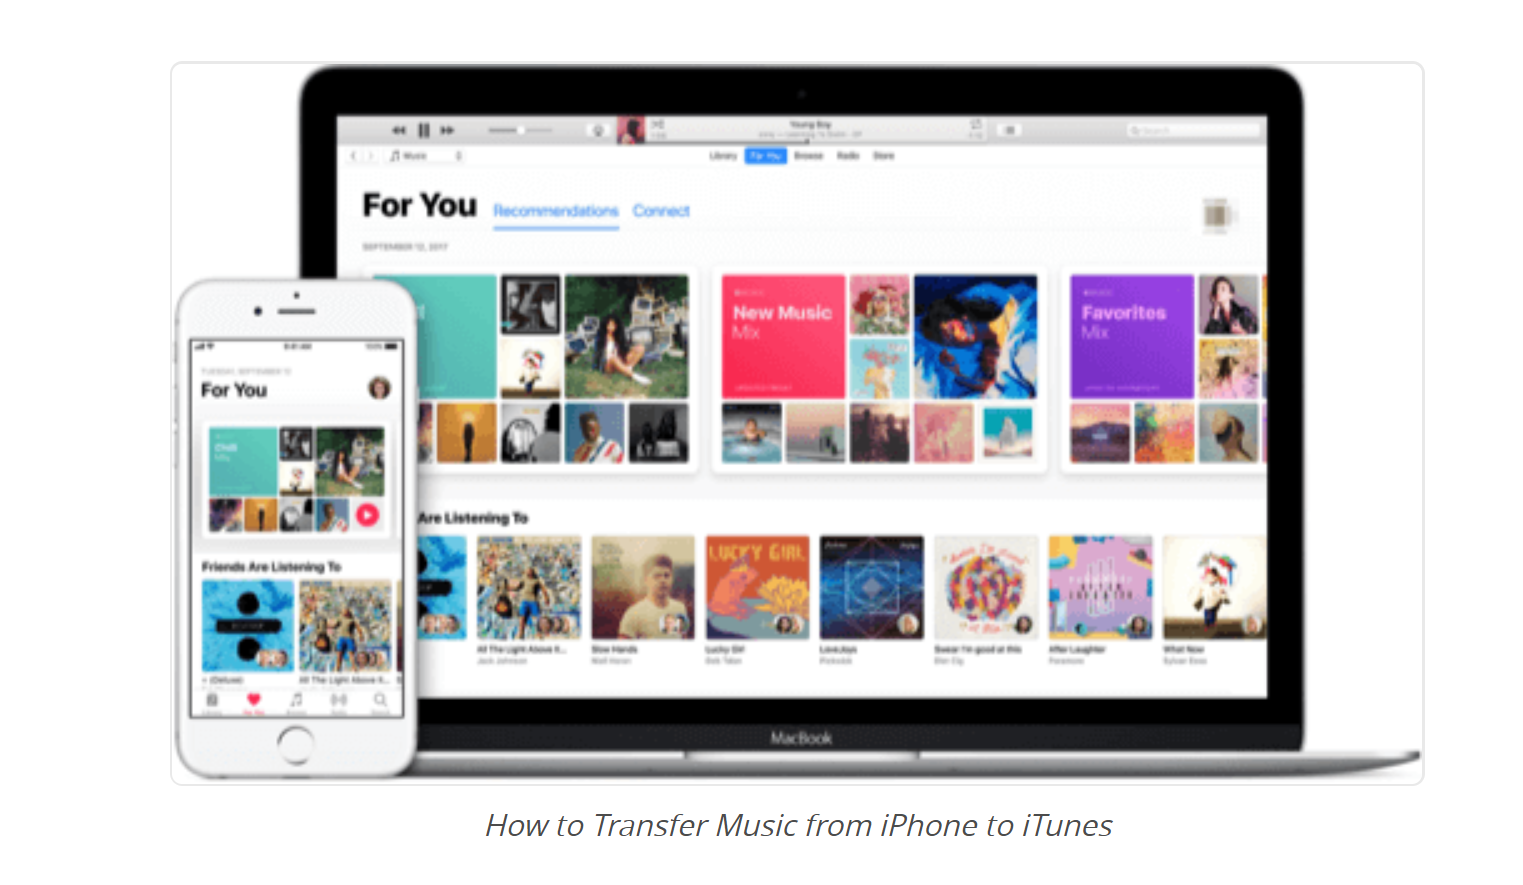 How To Sync Your iTunes Music Library to The iPhone